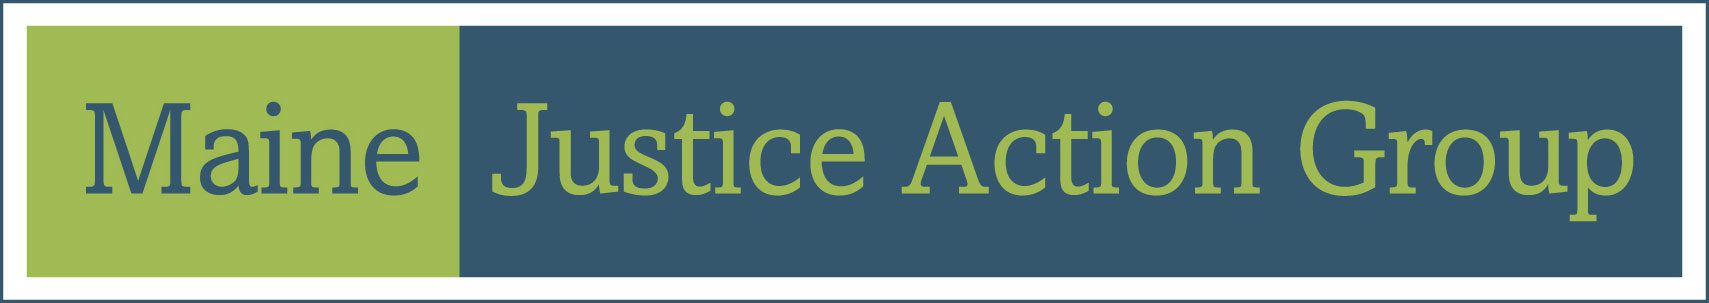 Maine Justice Action Group Logo